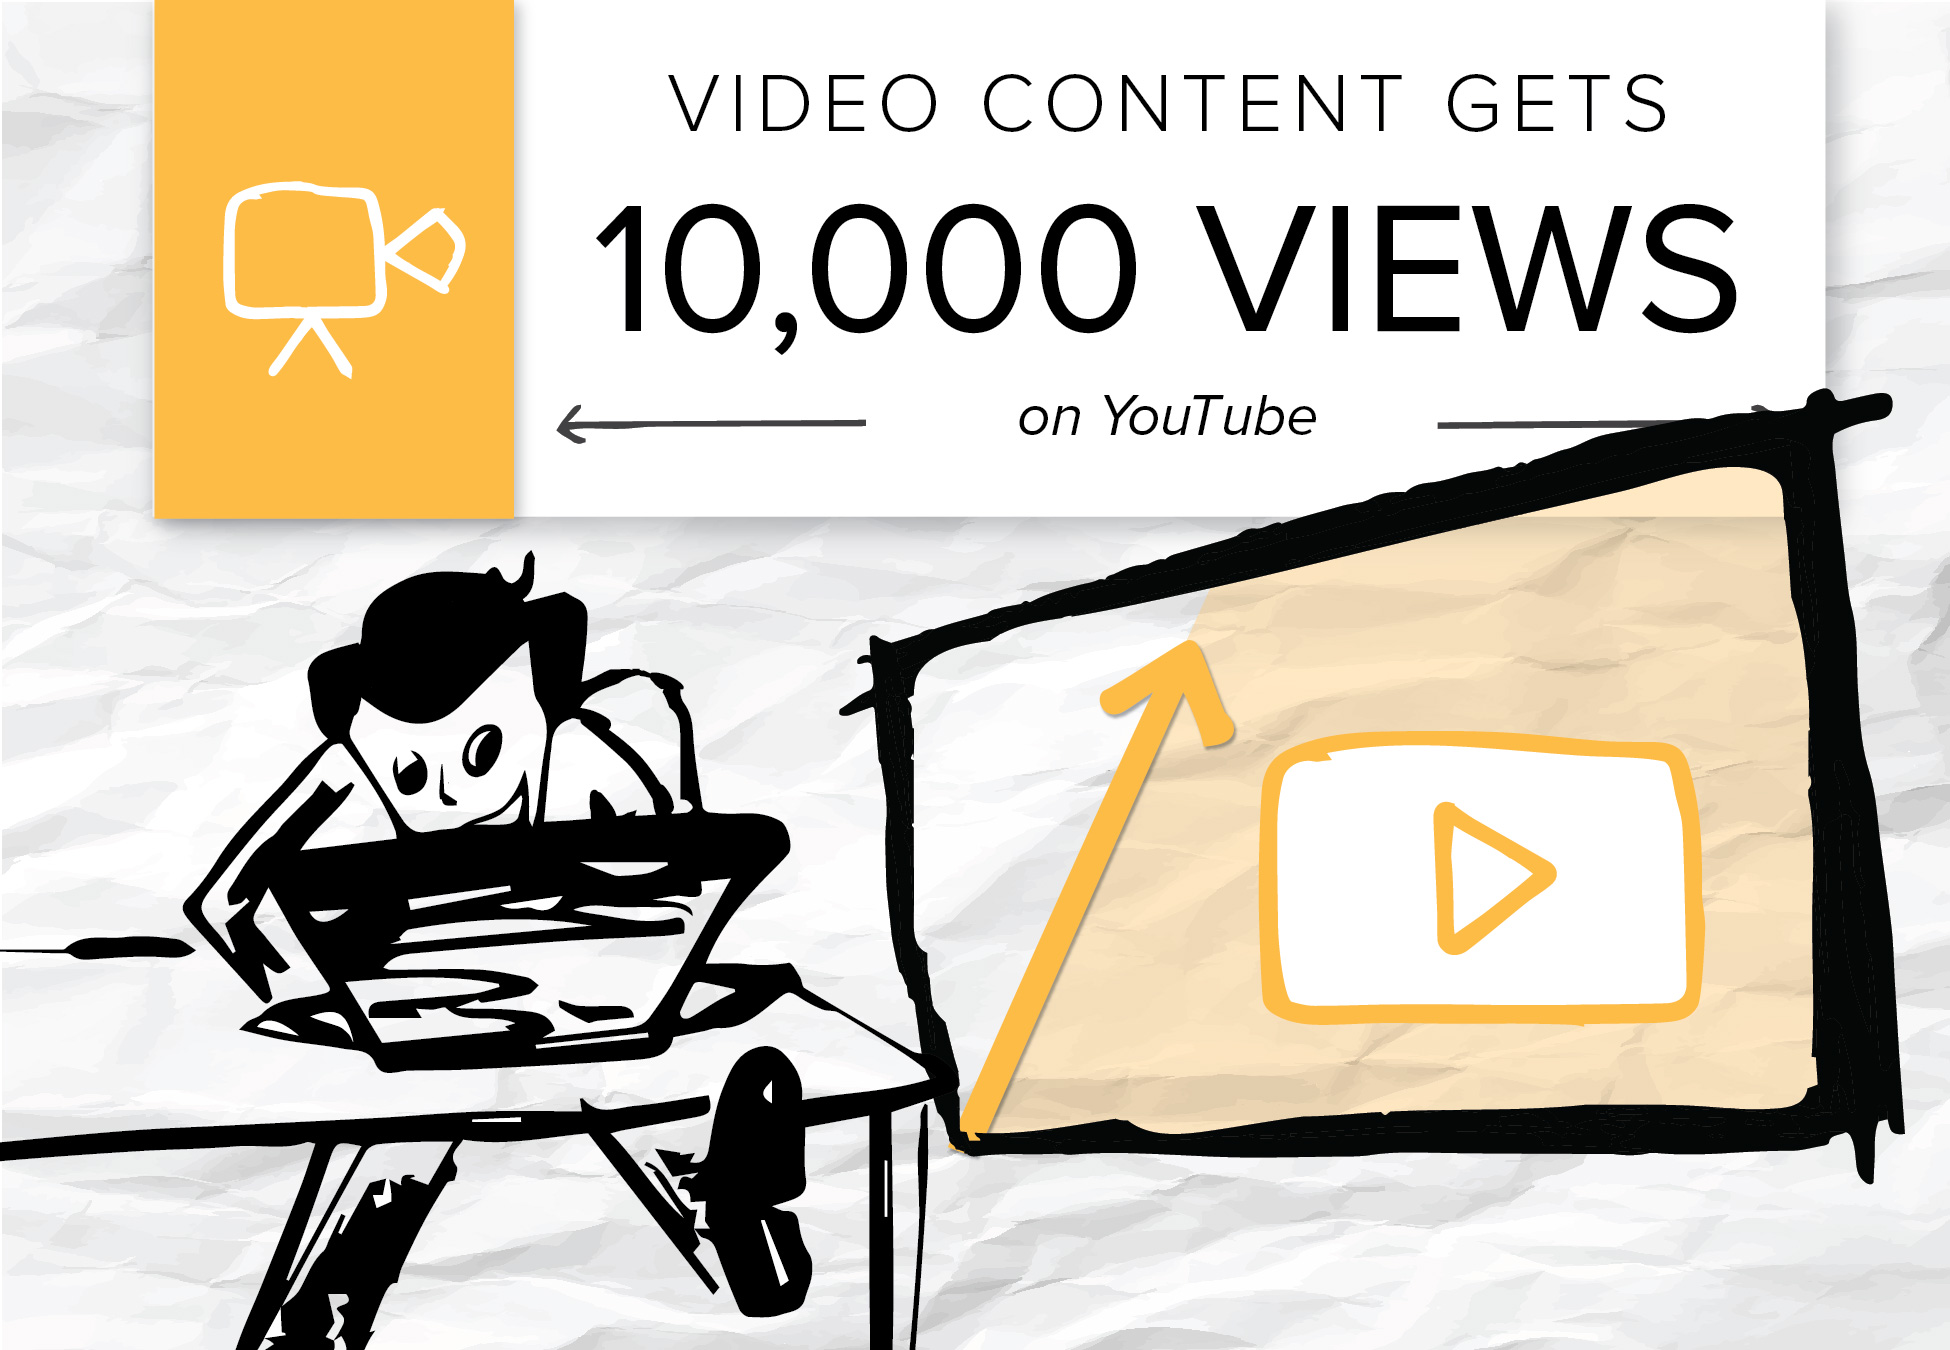 A good video marketing strategy can help brands see quick wins online.